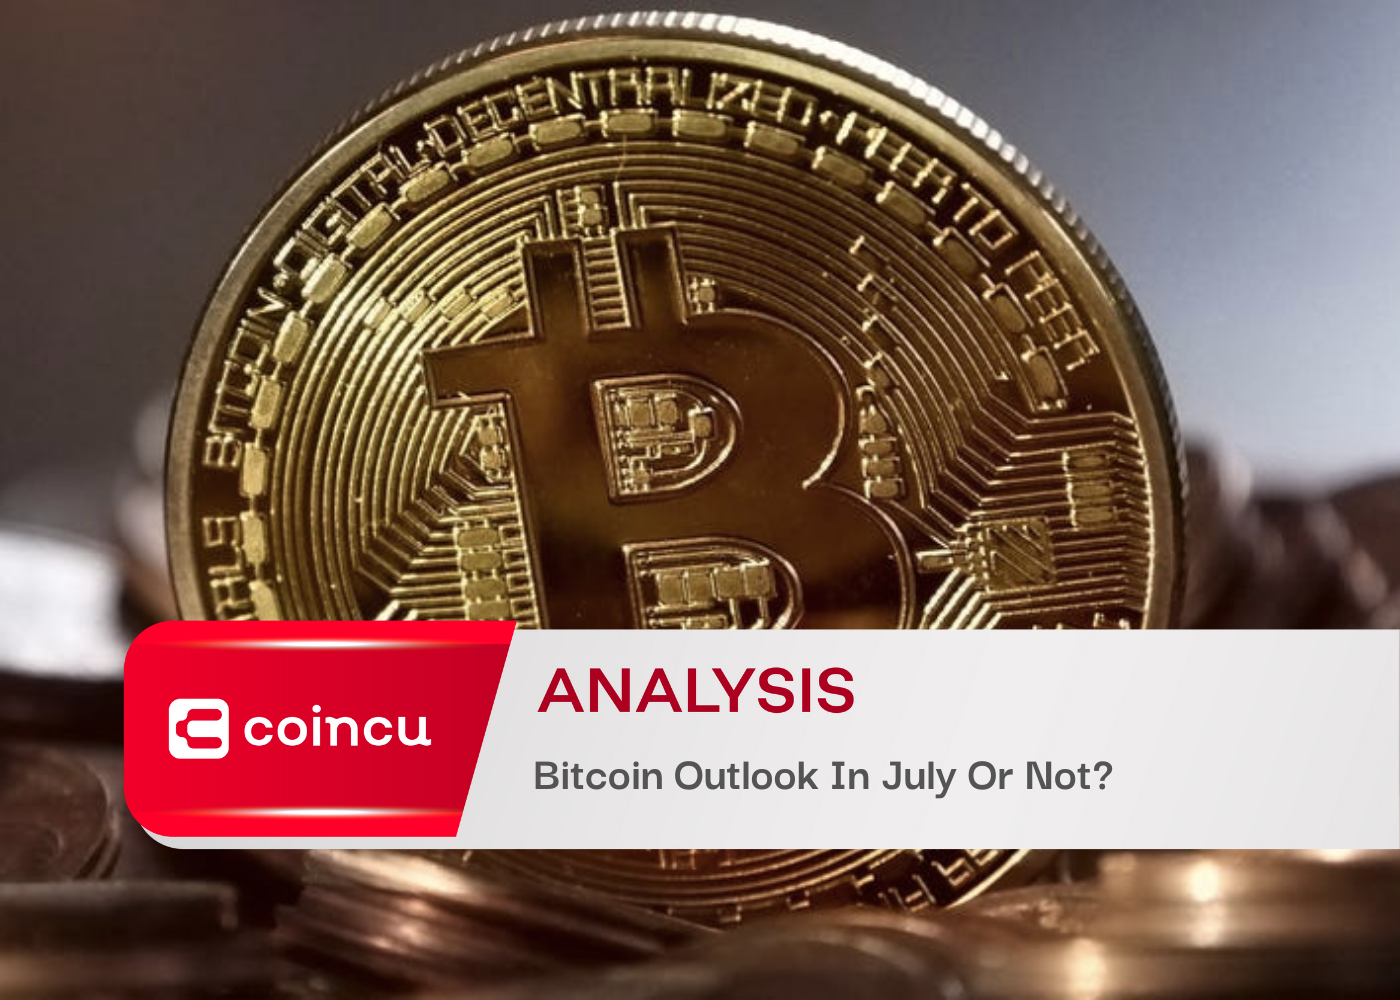 Bitcoin Outlook In July Or Not?